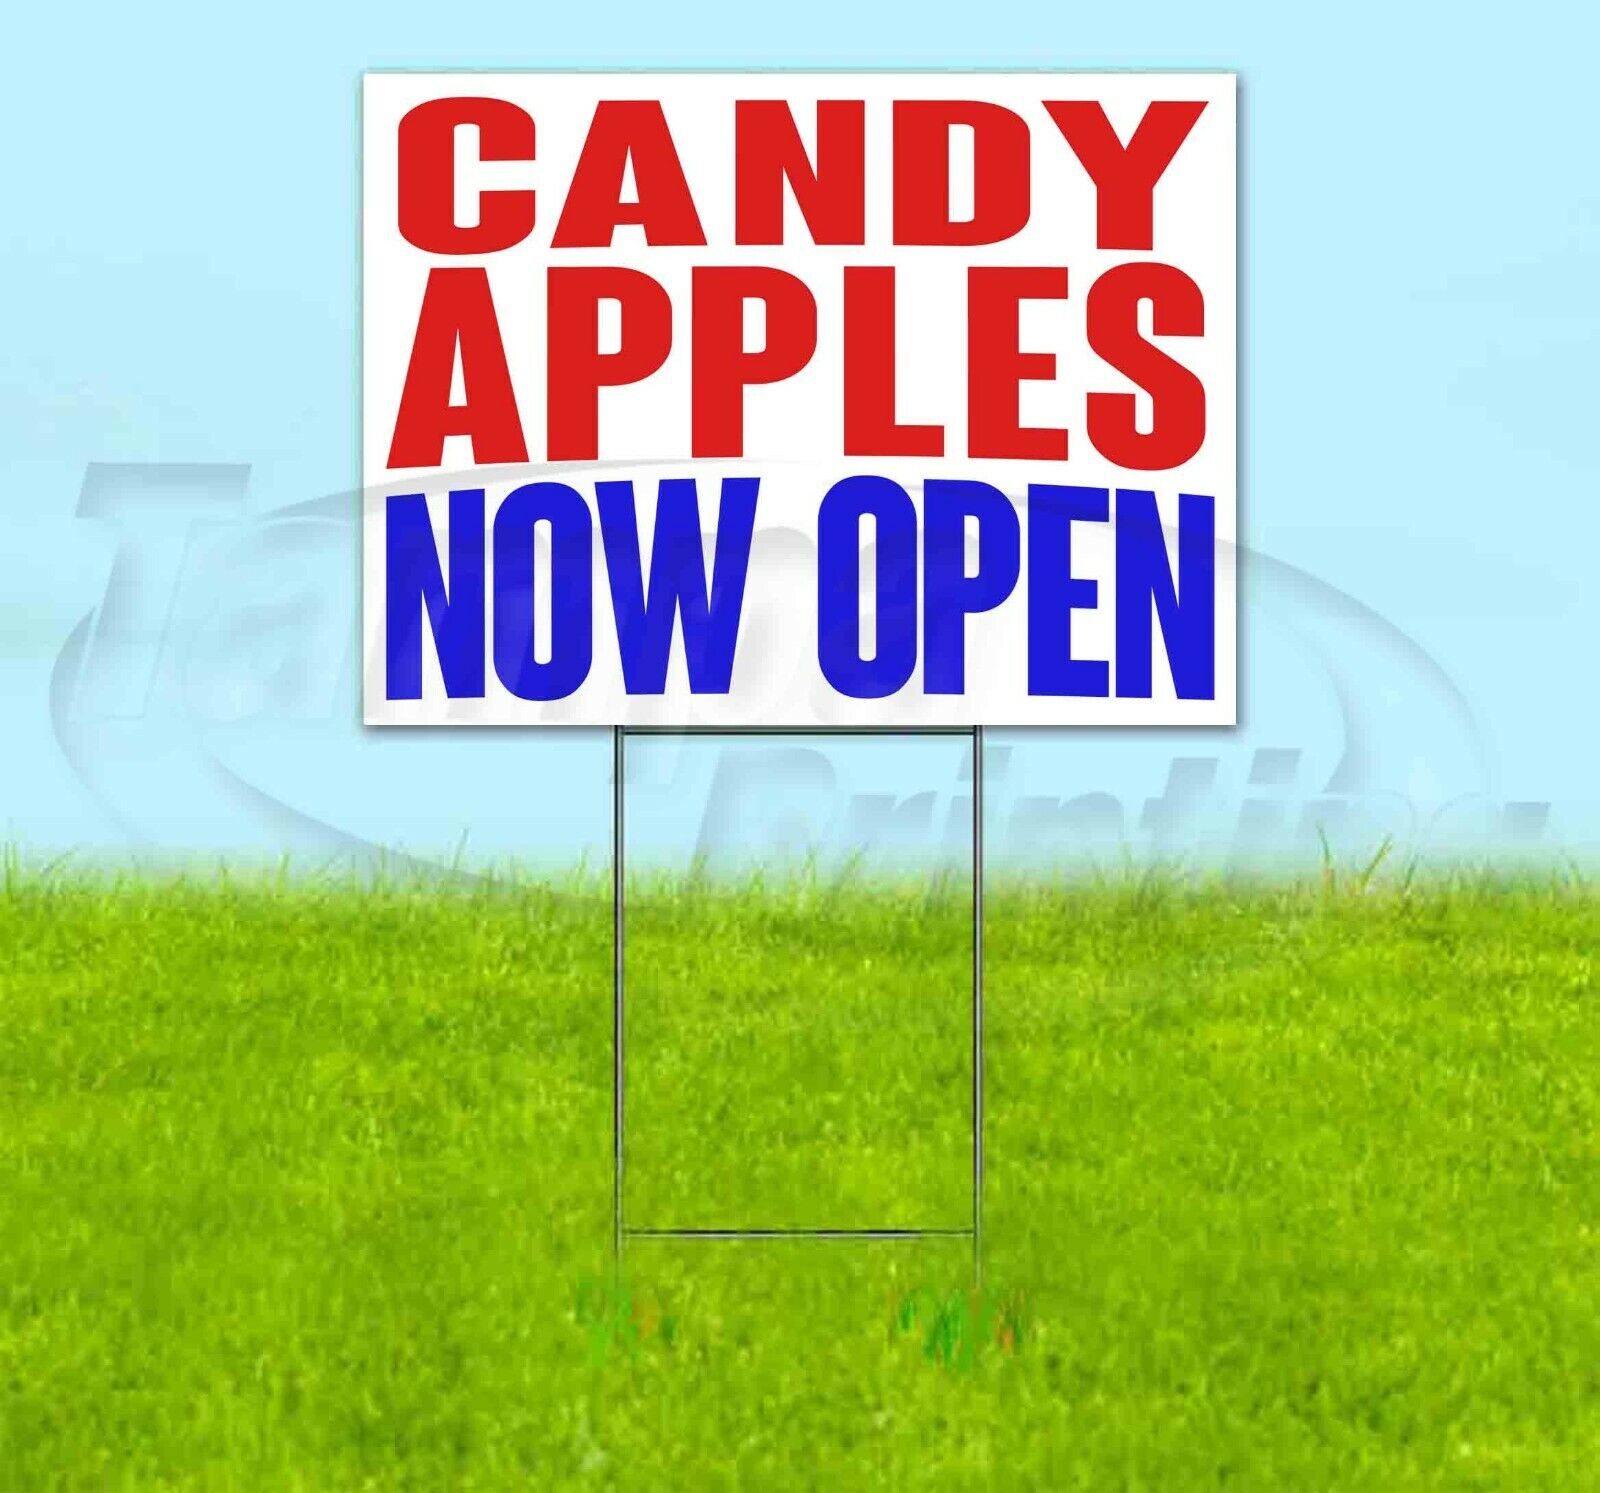 CANDY APPLES NOW OPEN Yard Sign Corrugated Plastic Bandit Lawn D